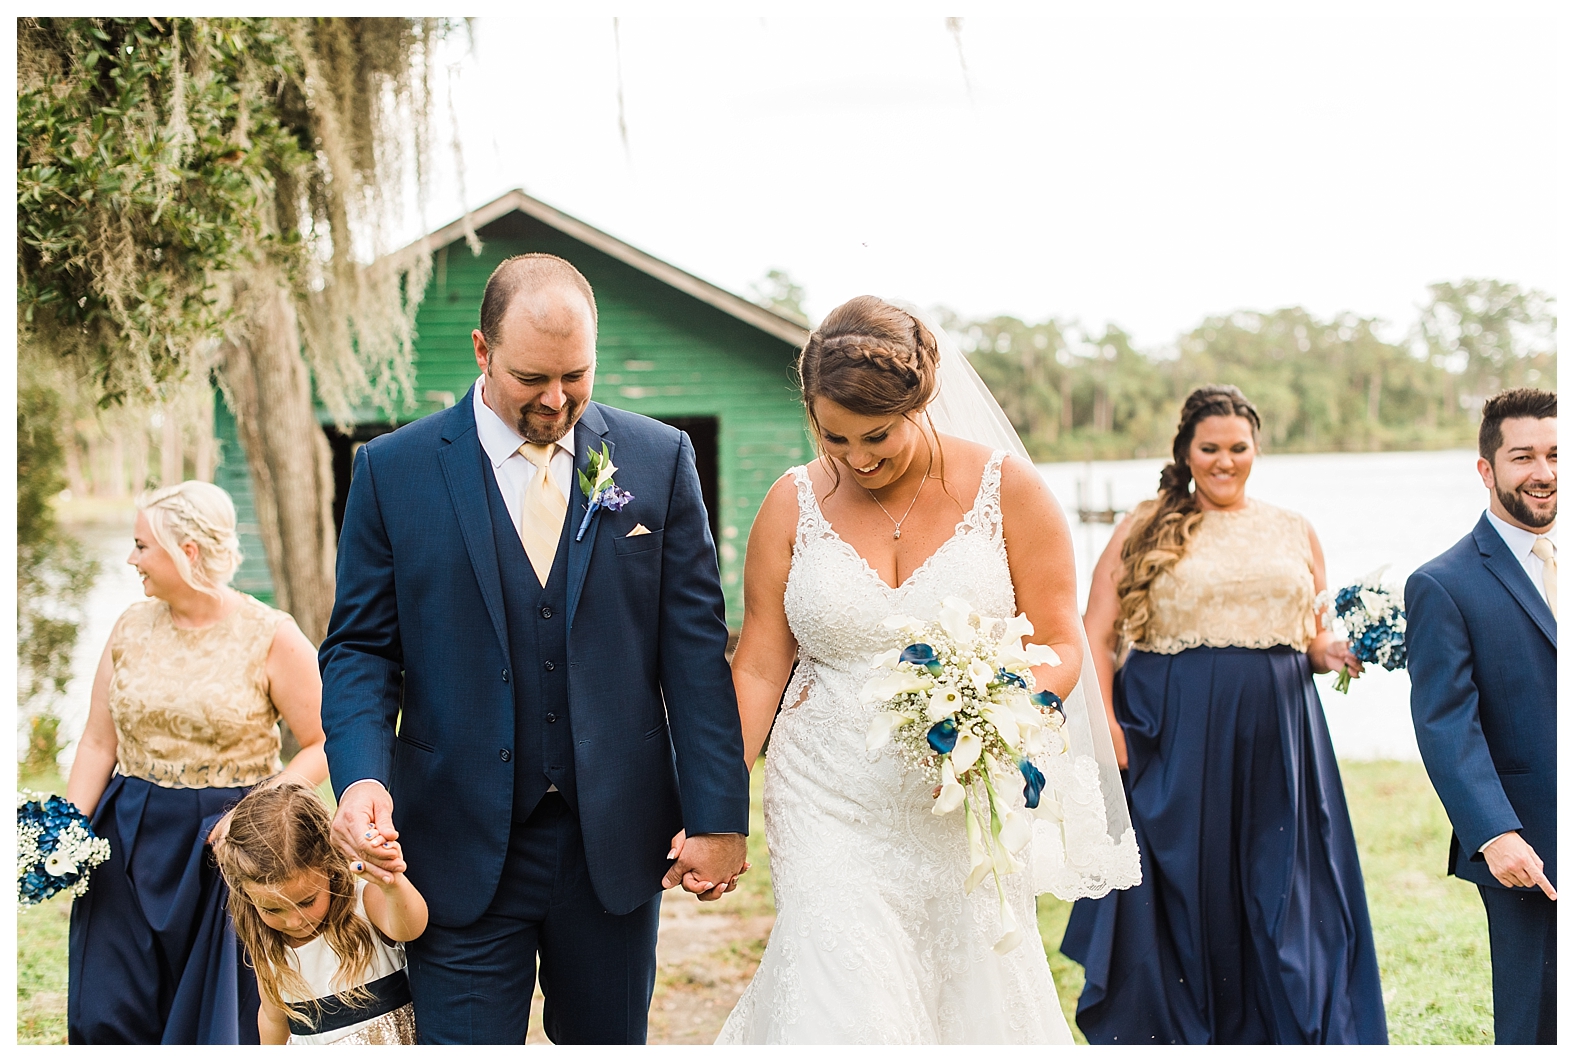 The Bridal Party - Sara and Chad - Tampa Photographer